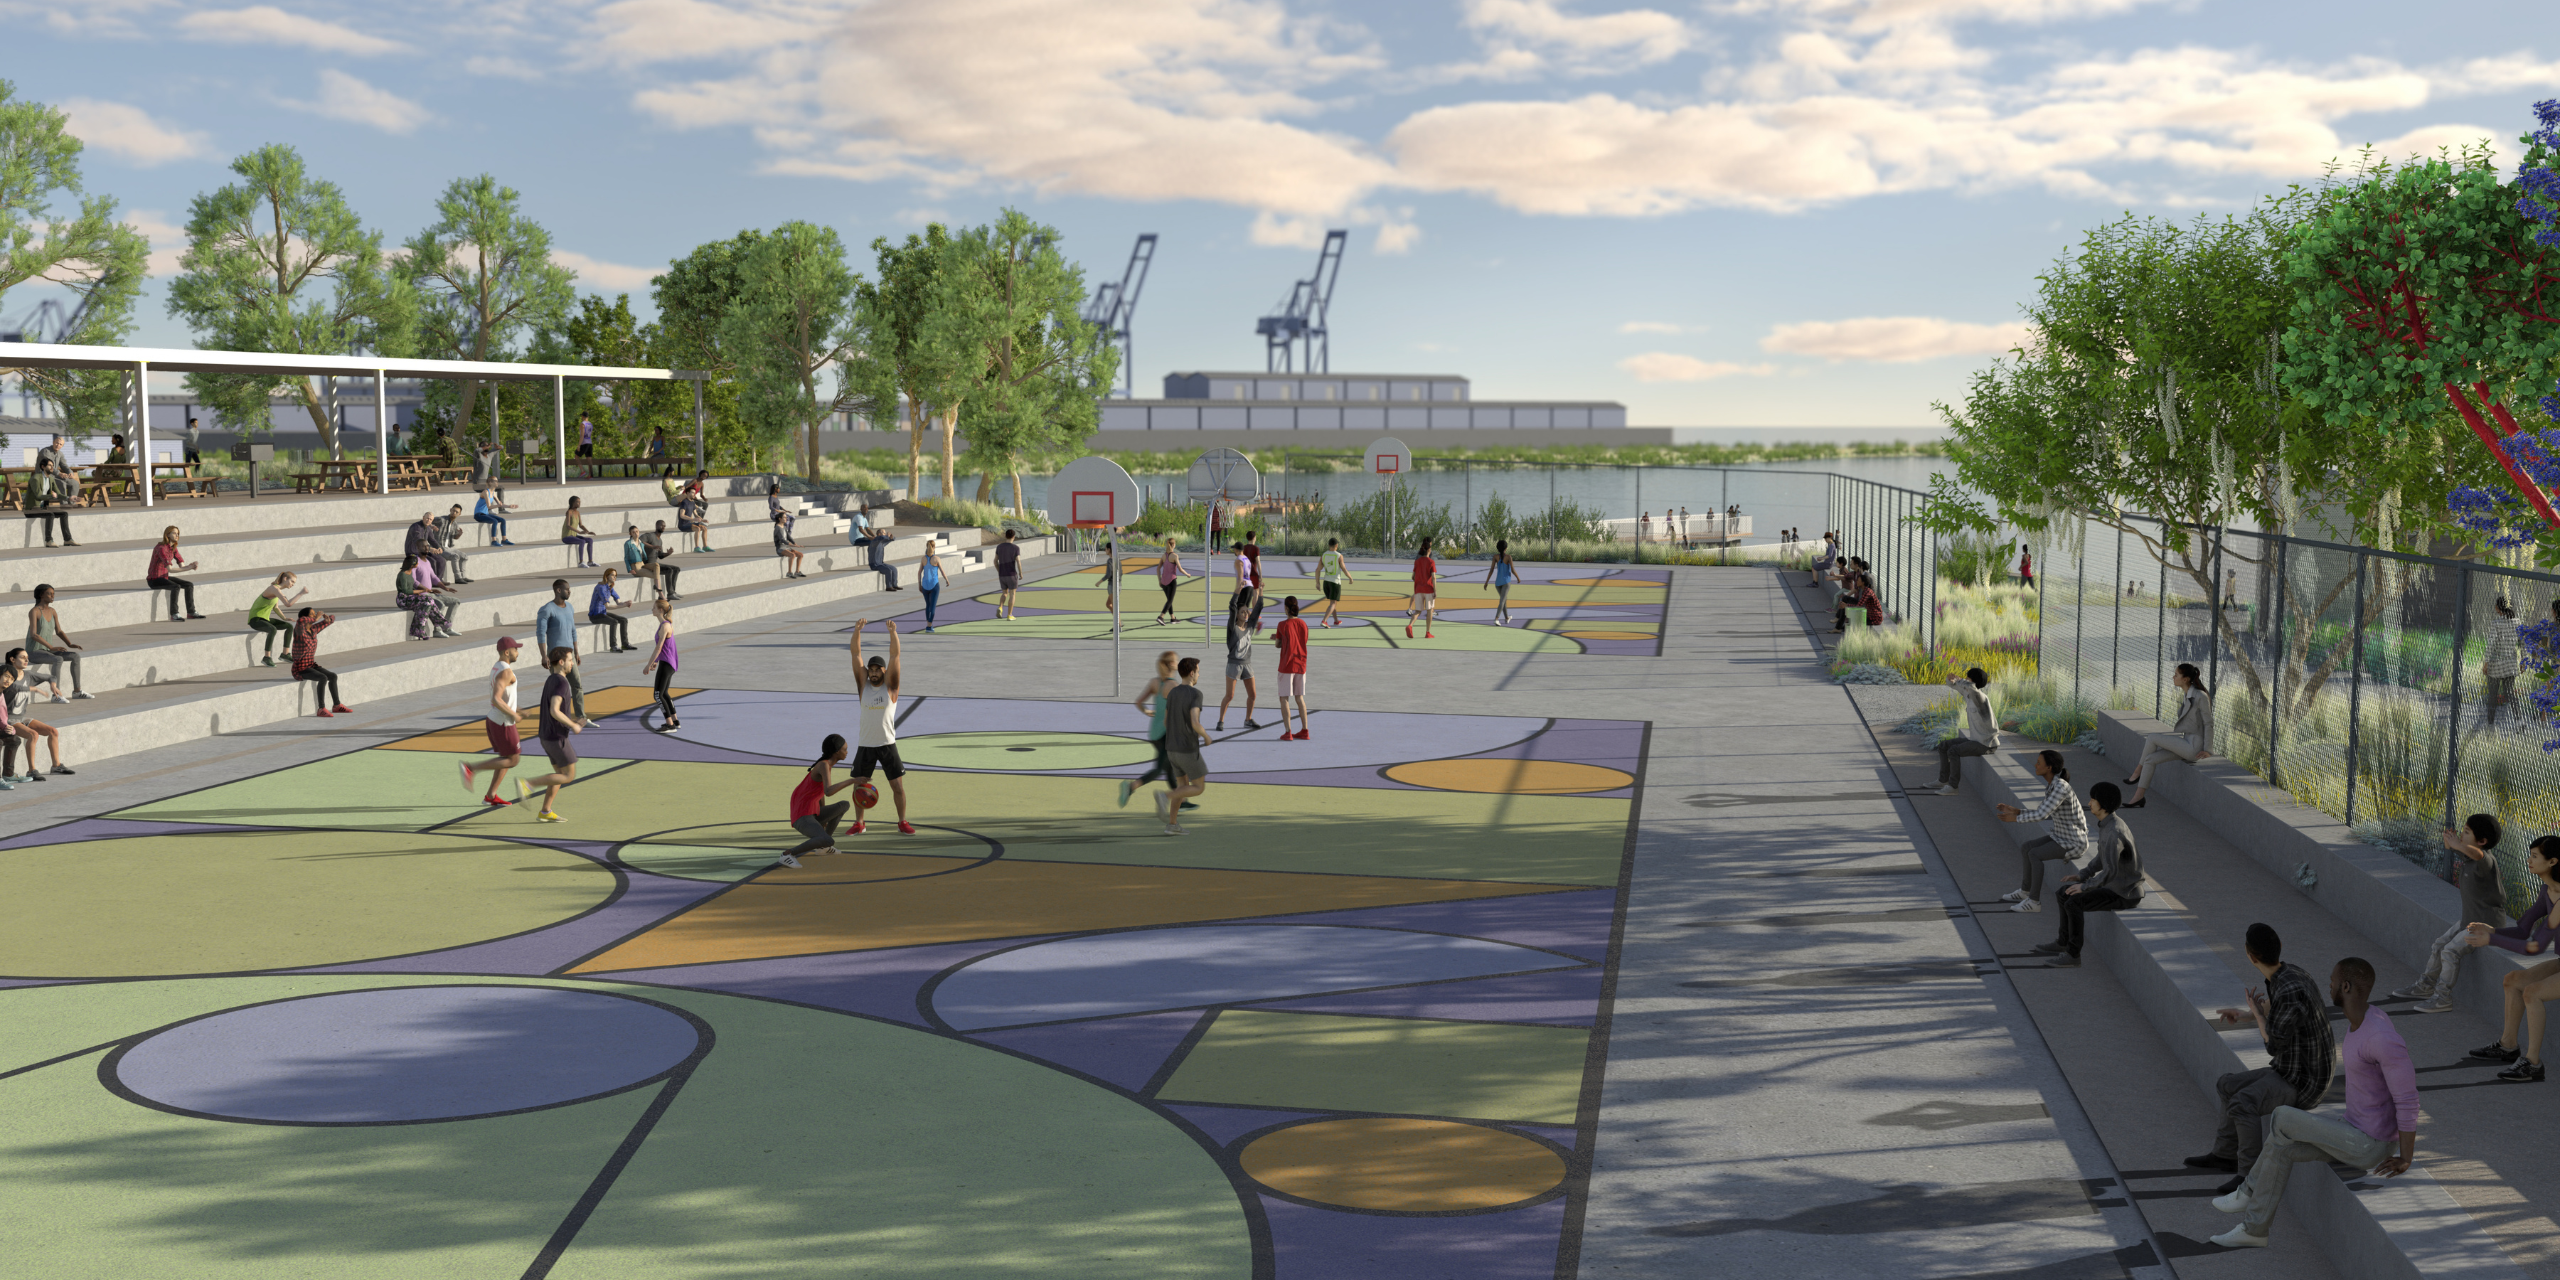 New basketball court rendering at India Basin Waterfront Park